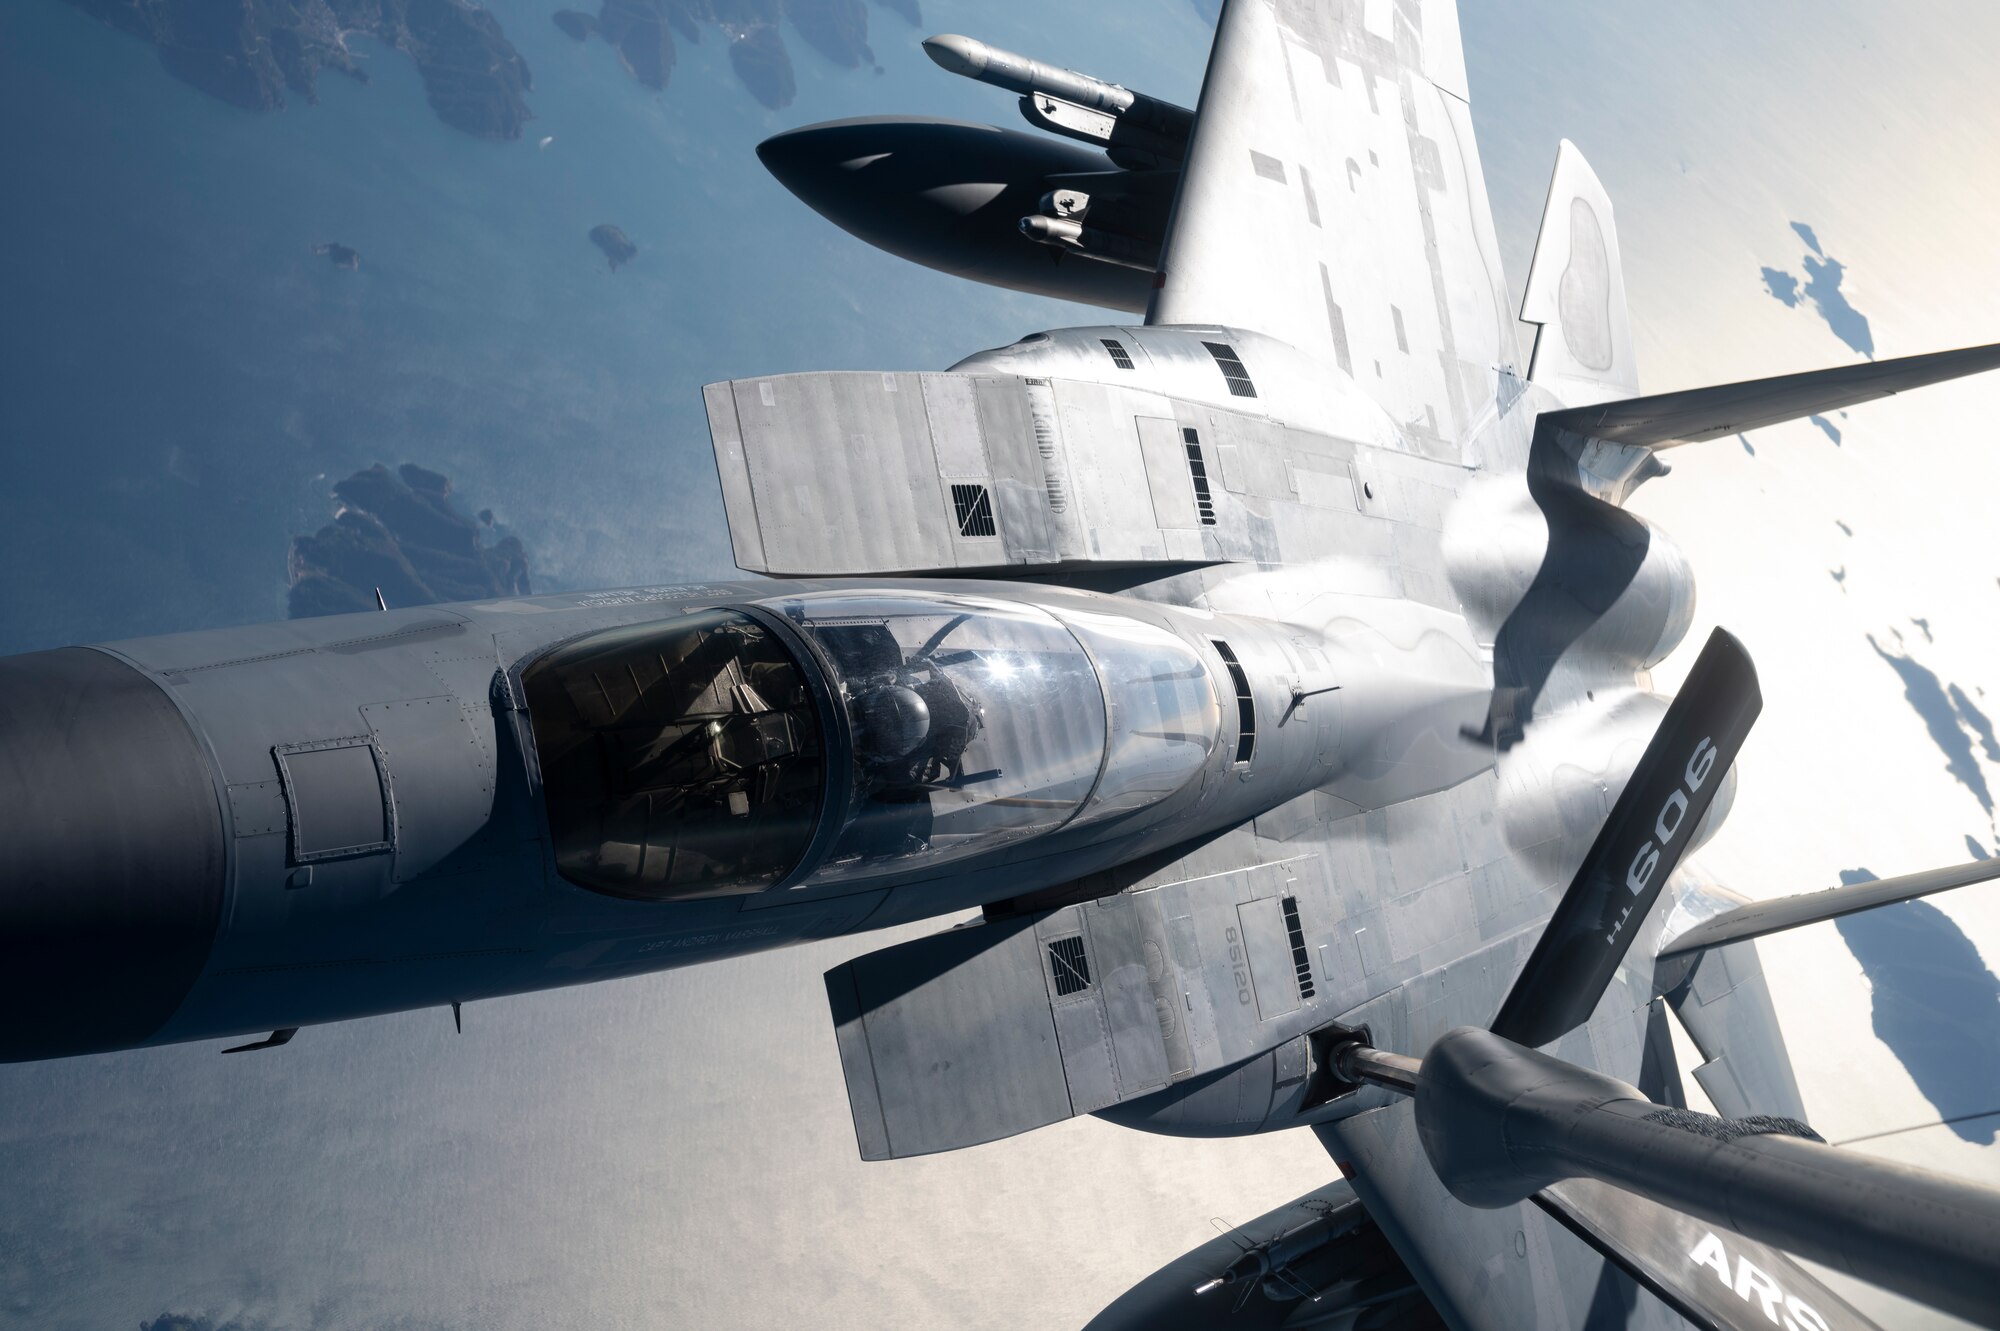 A U.S. Air Force 44th Fighter Squadron F-15C Eagle receives fuel from a 909th Air Refueling Squadron KC-135 Stratotanker over South Korea, Nov. 4, 2022. Kadena's F-15's  were the first operational Eagles outfitted with an active electronically-scanned array radar, and the Legion Pod, the first infrared search-and-track system compatible with the aircraft. (U.S. Air Force photo by Senior Airman Jessi Roth)